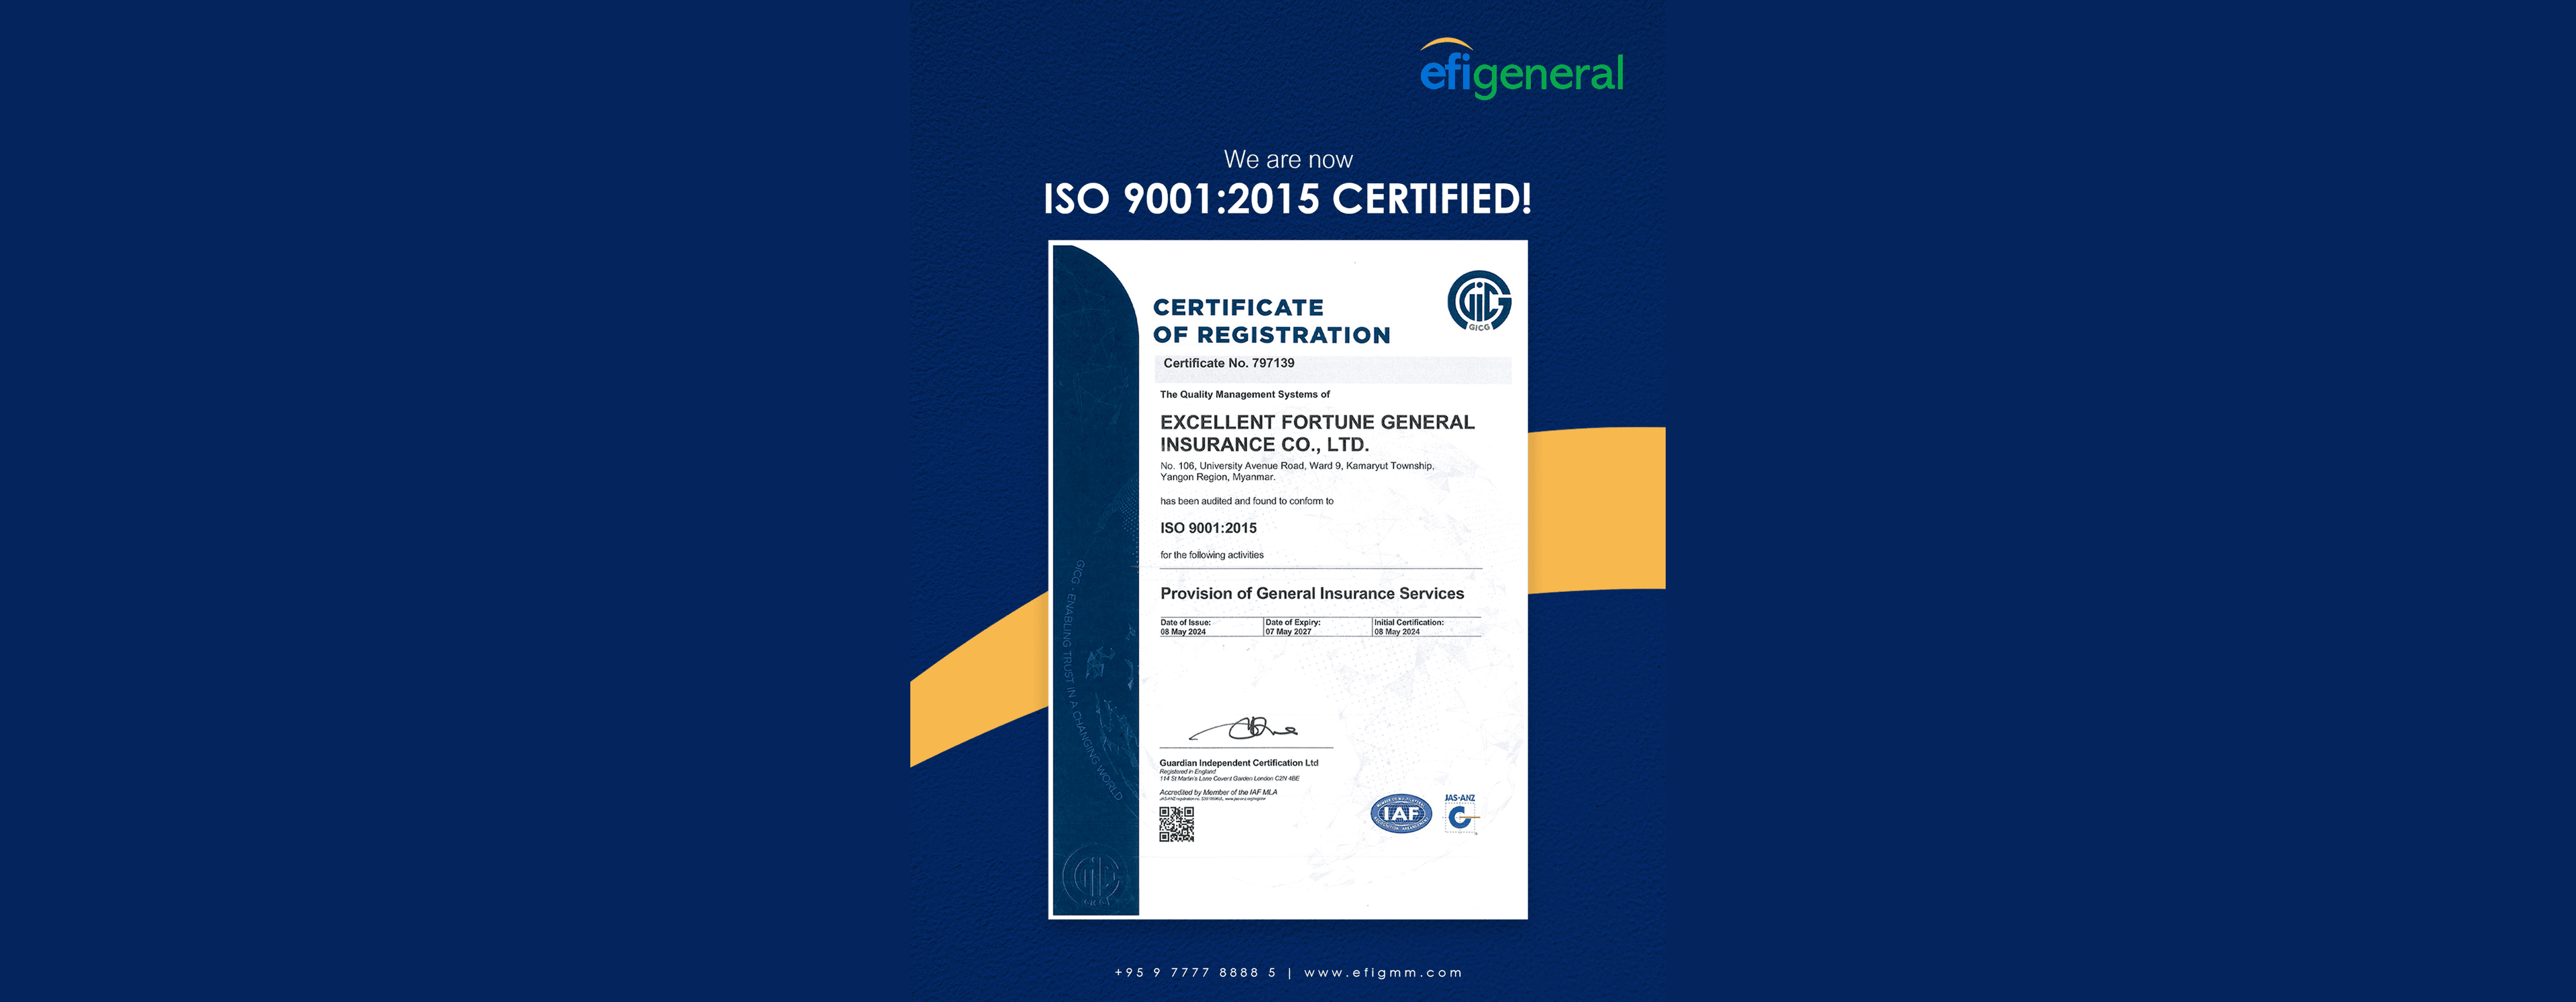 RECEIVING OF “ISO 9001:2015” QUALITY MANAGEMENT SYSTEM CERTIFICATION BY EXCELLENT FORTUNE GENERAL INSURANCE